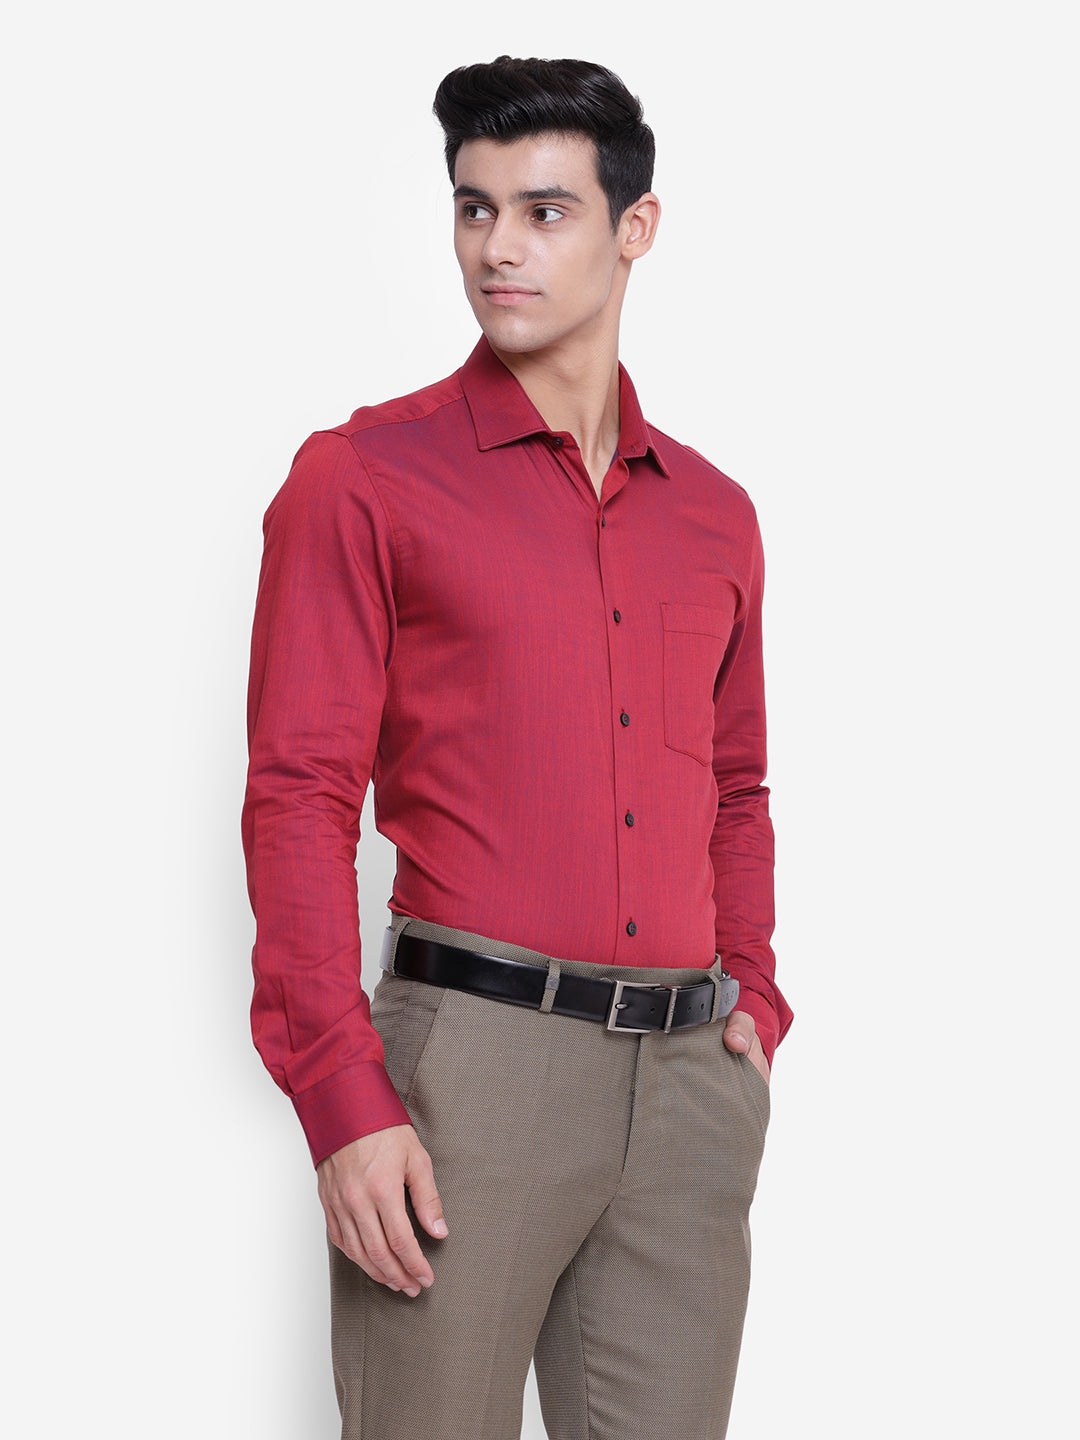 Solid Red Slim Fit Formal Shirt